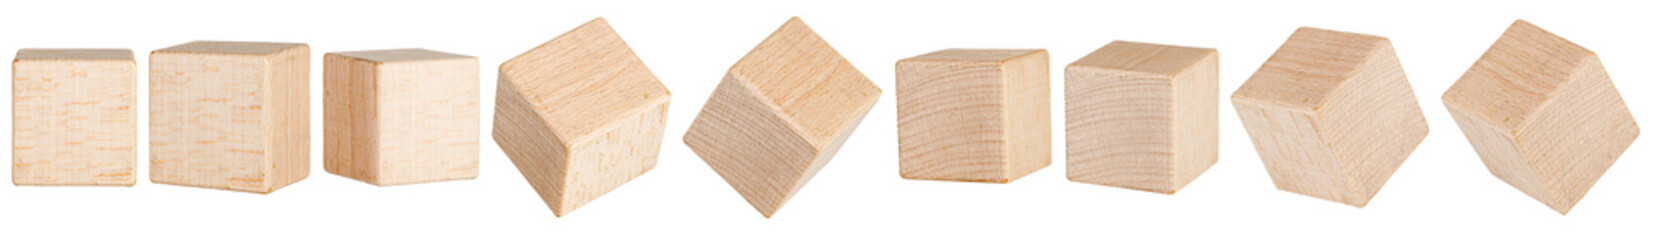 one wooden cubes from different angles on a white background, isolated background close up